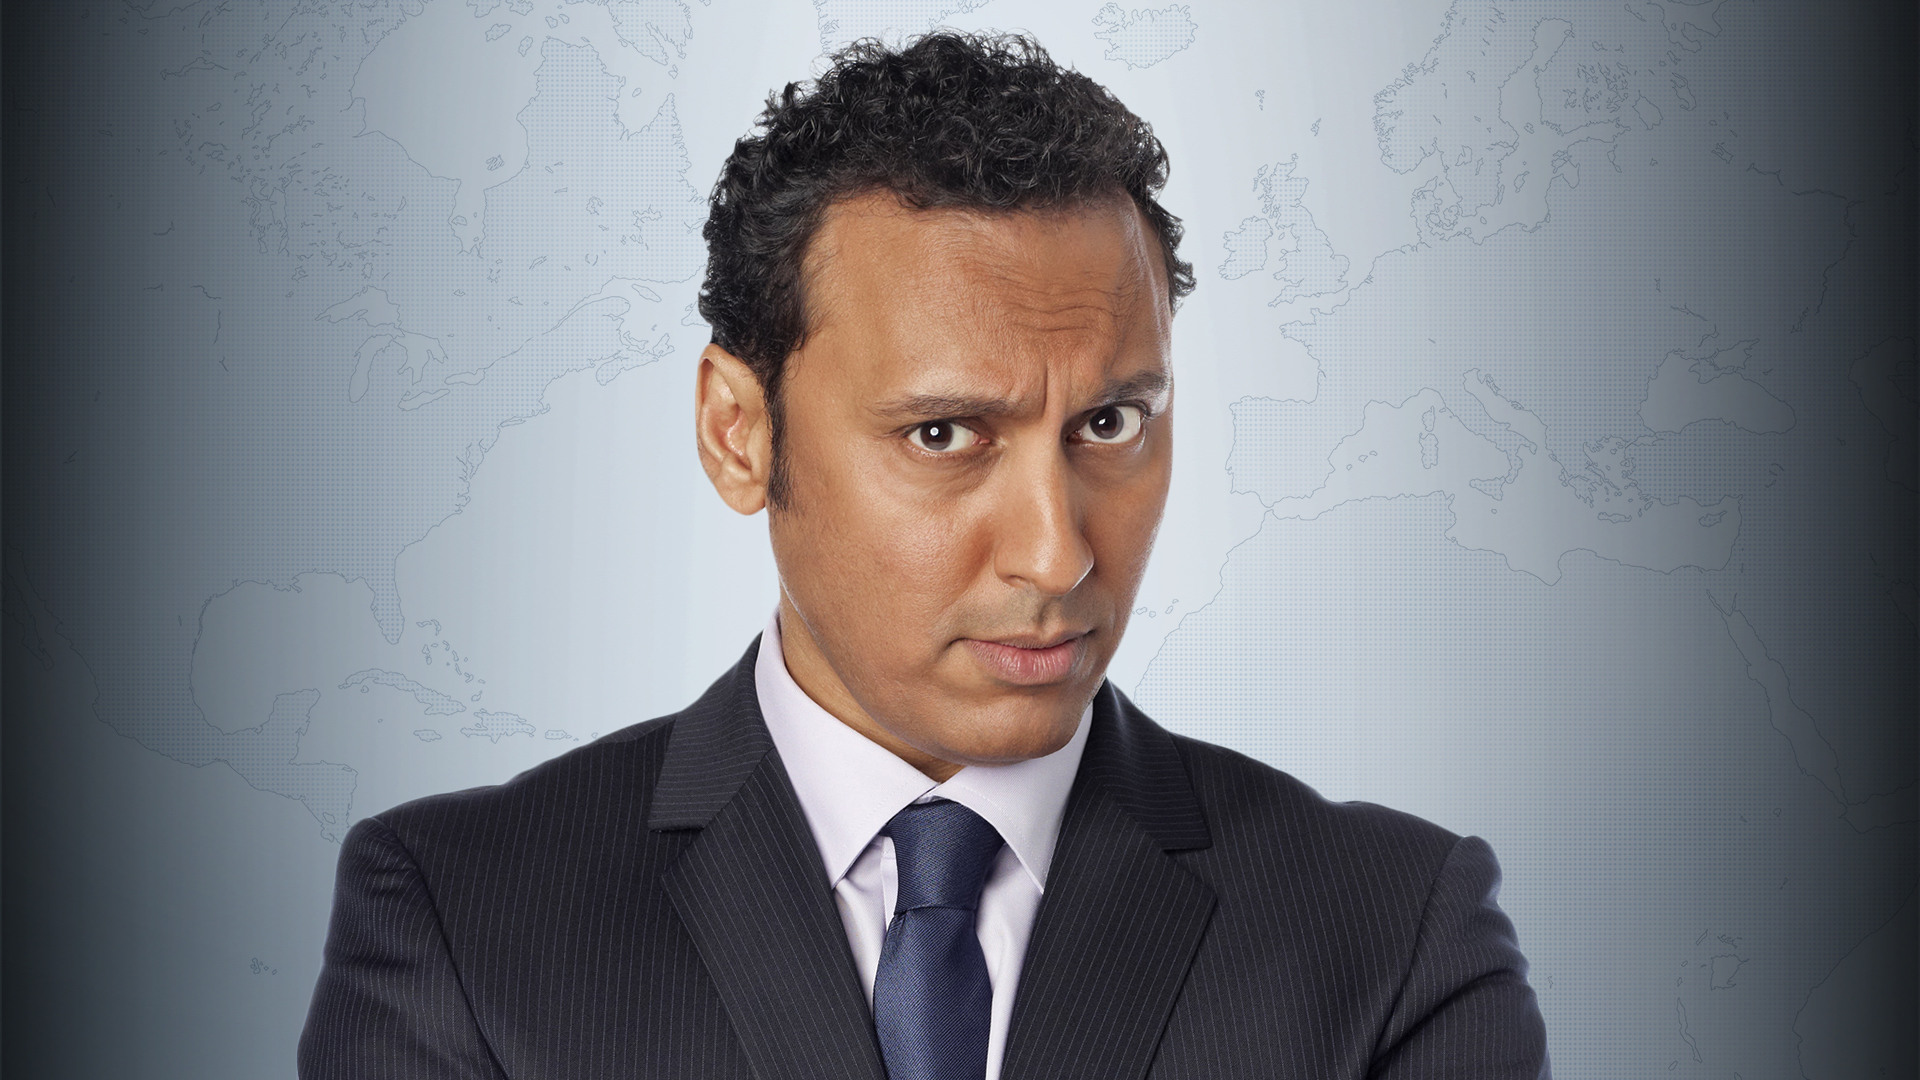 Aasif Mandvi Knows How to Make America Great Again